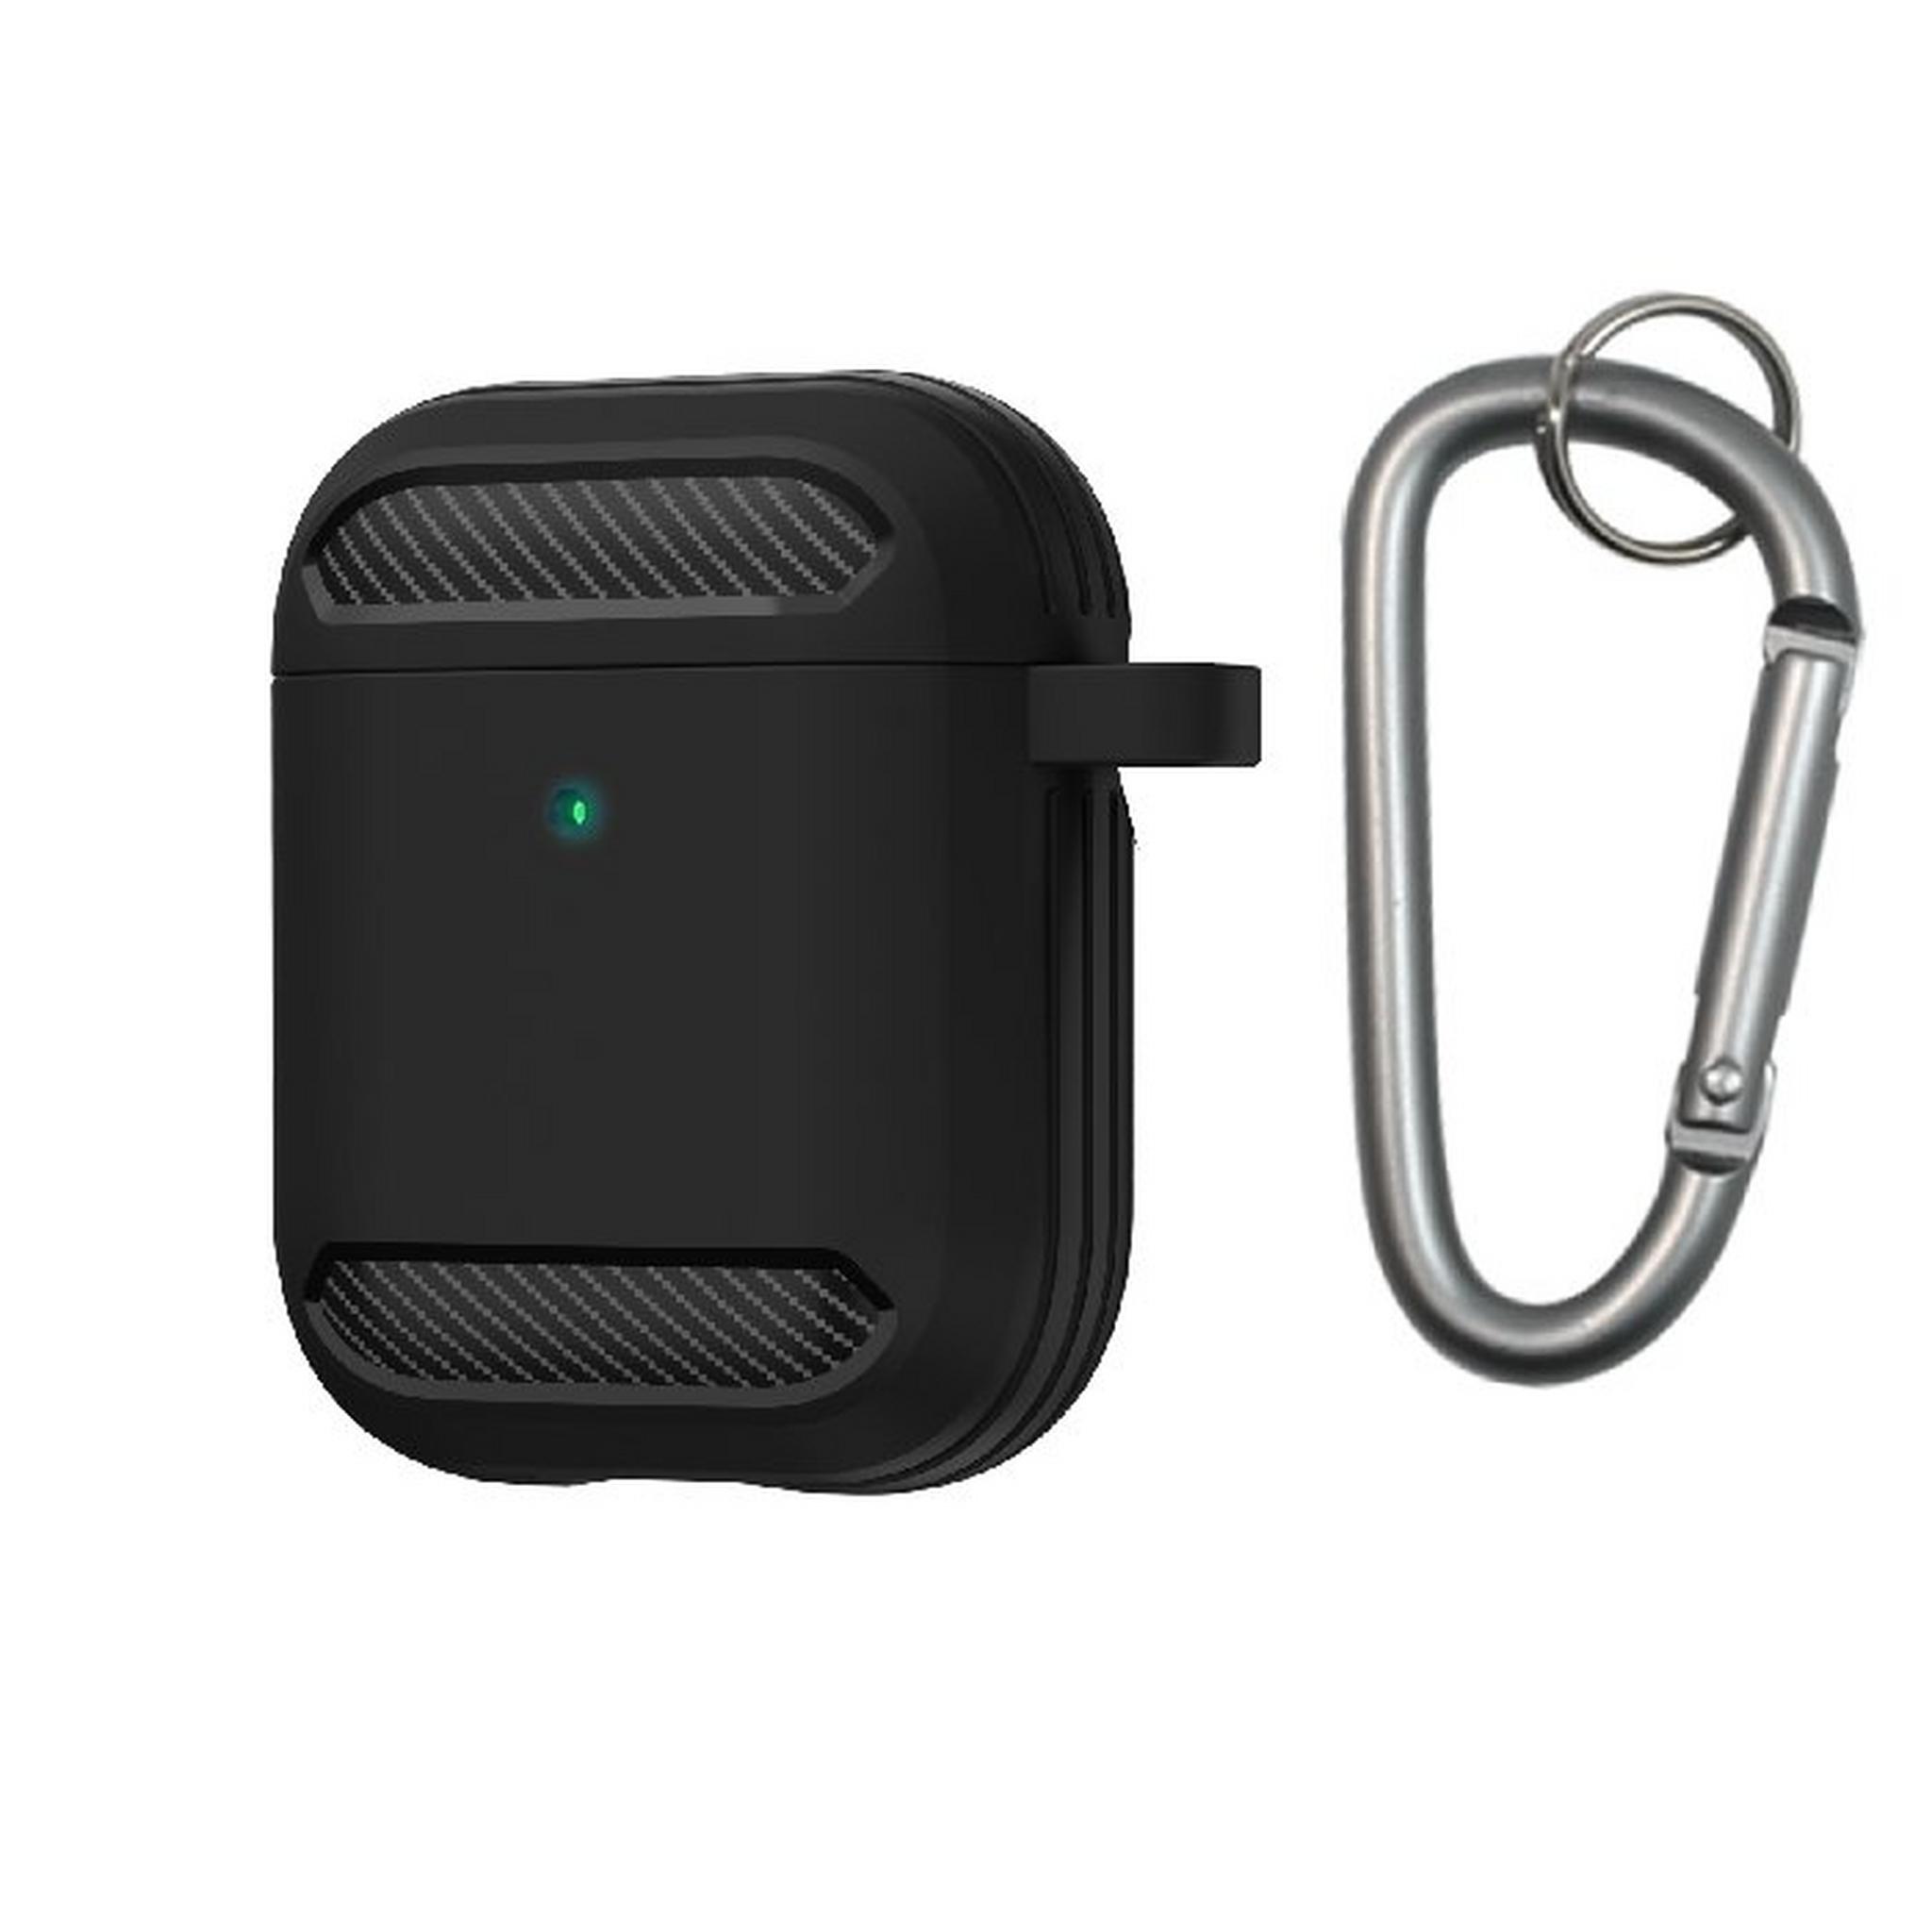 EQ SN05 Apple Airpods 1 and 2 Case - Black